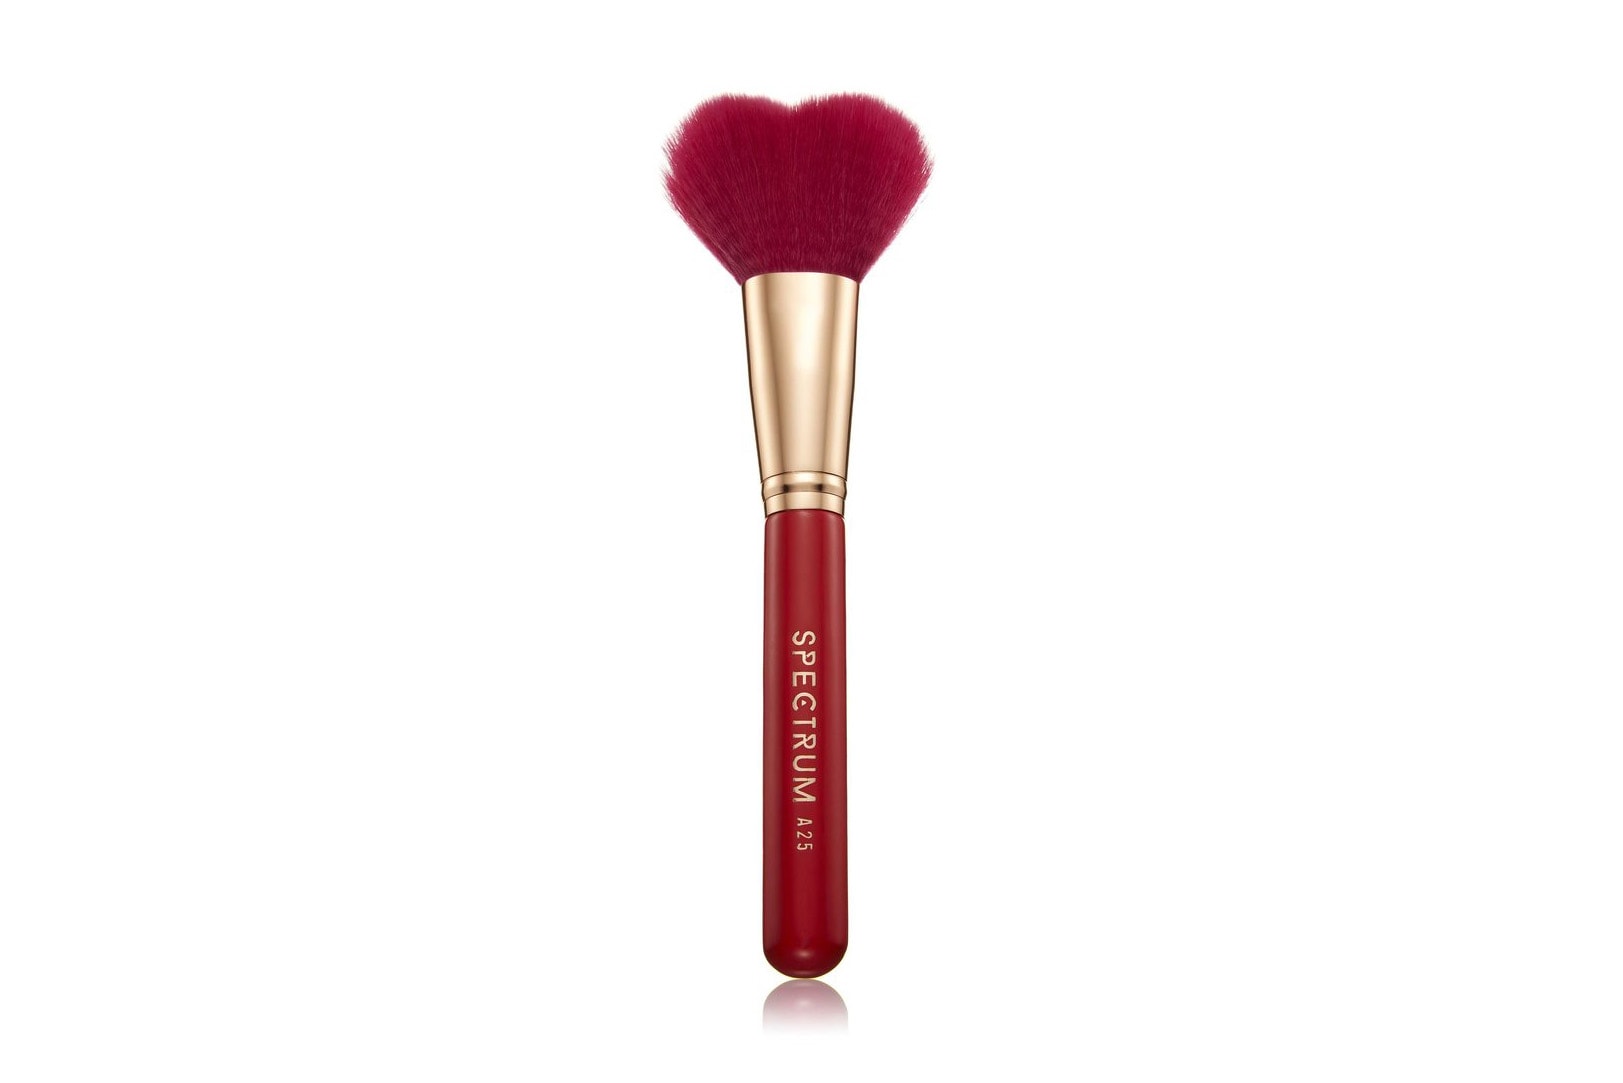 Spectrum Collections Valentines Sweetheart Makeup Brush Set Brushes Heart shaped red pink rose gold where to buy